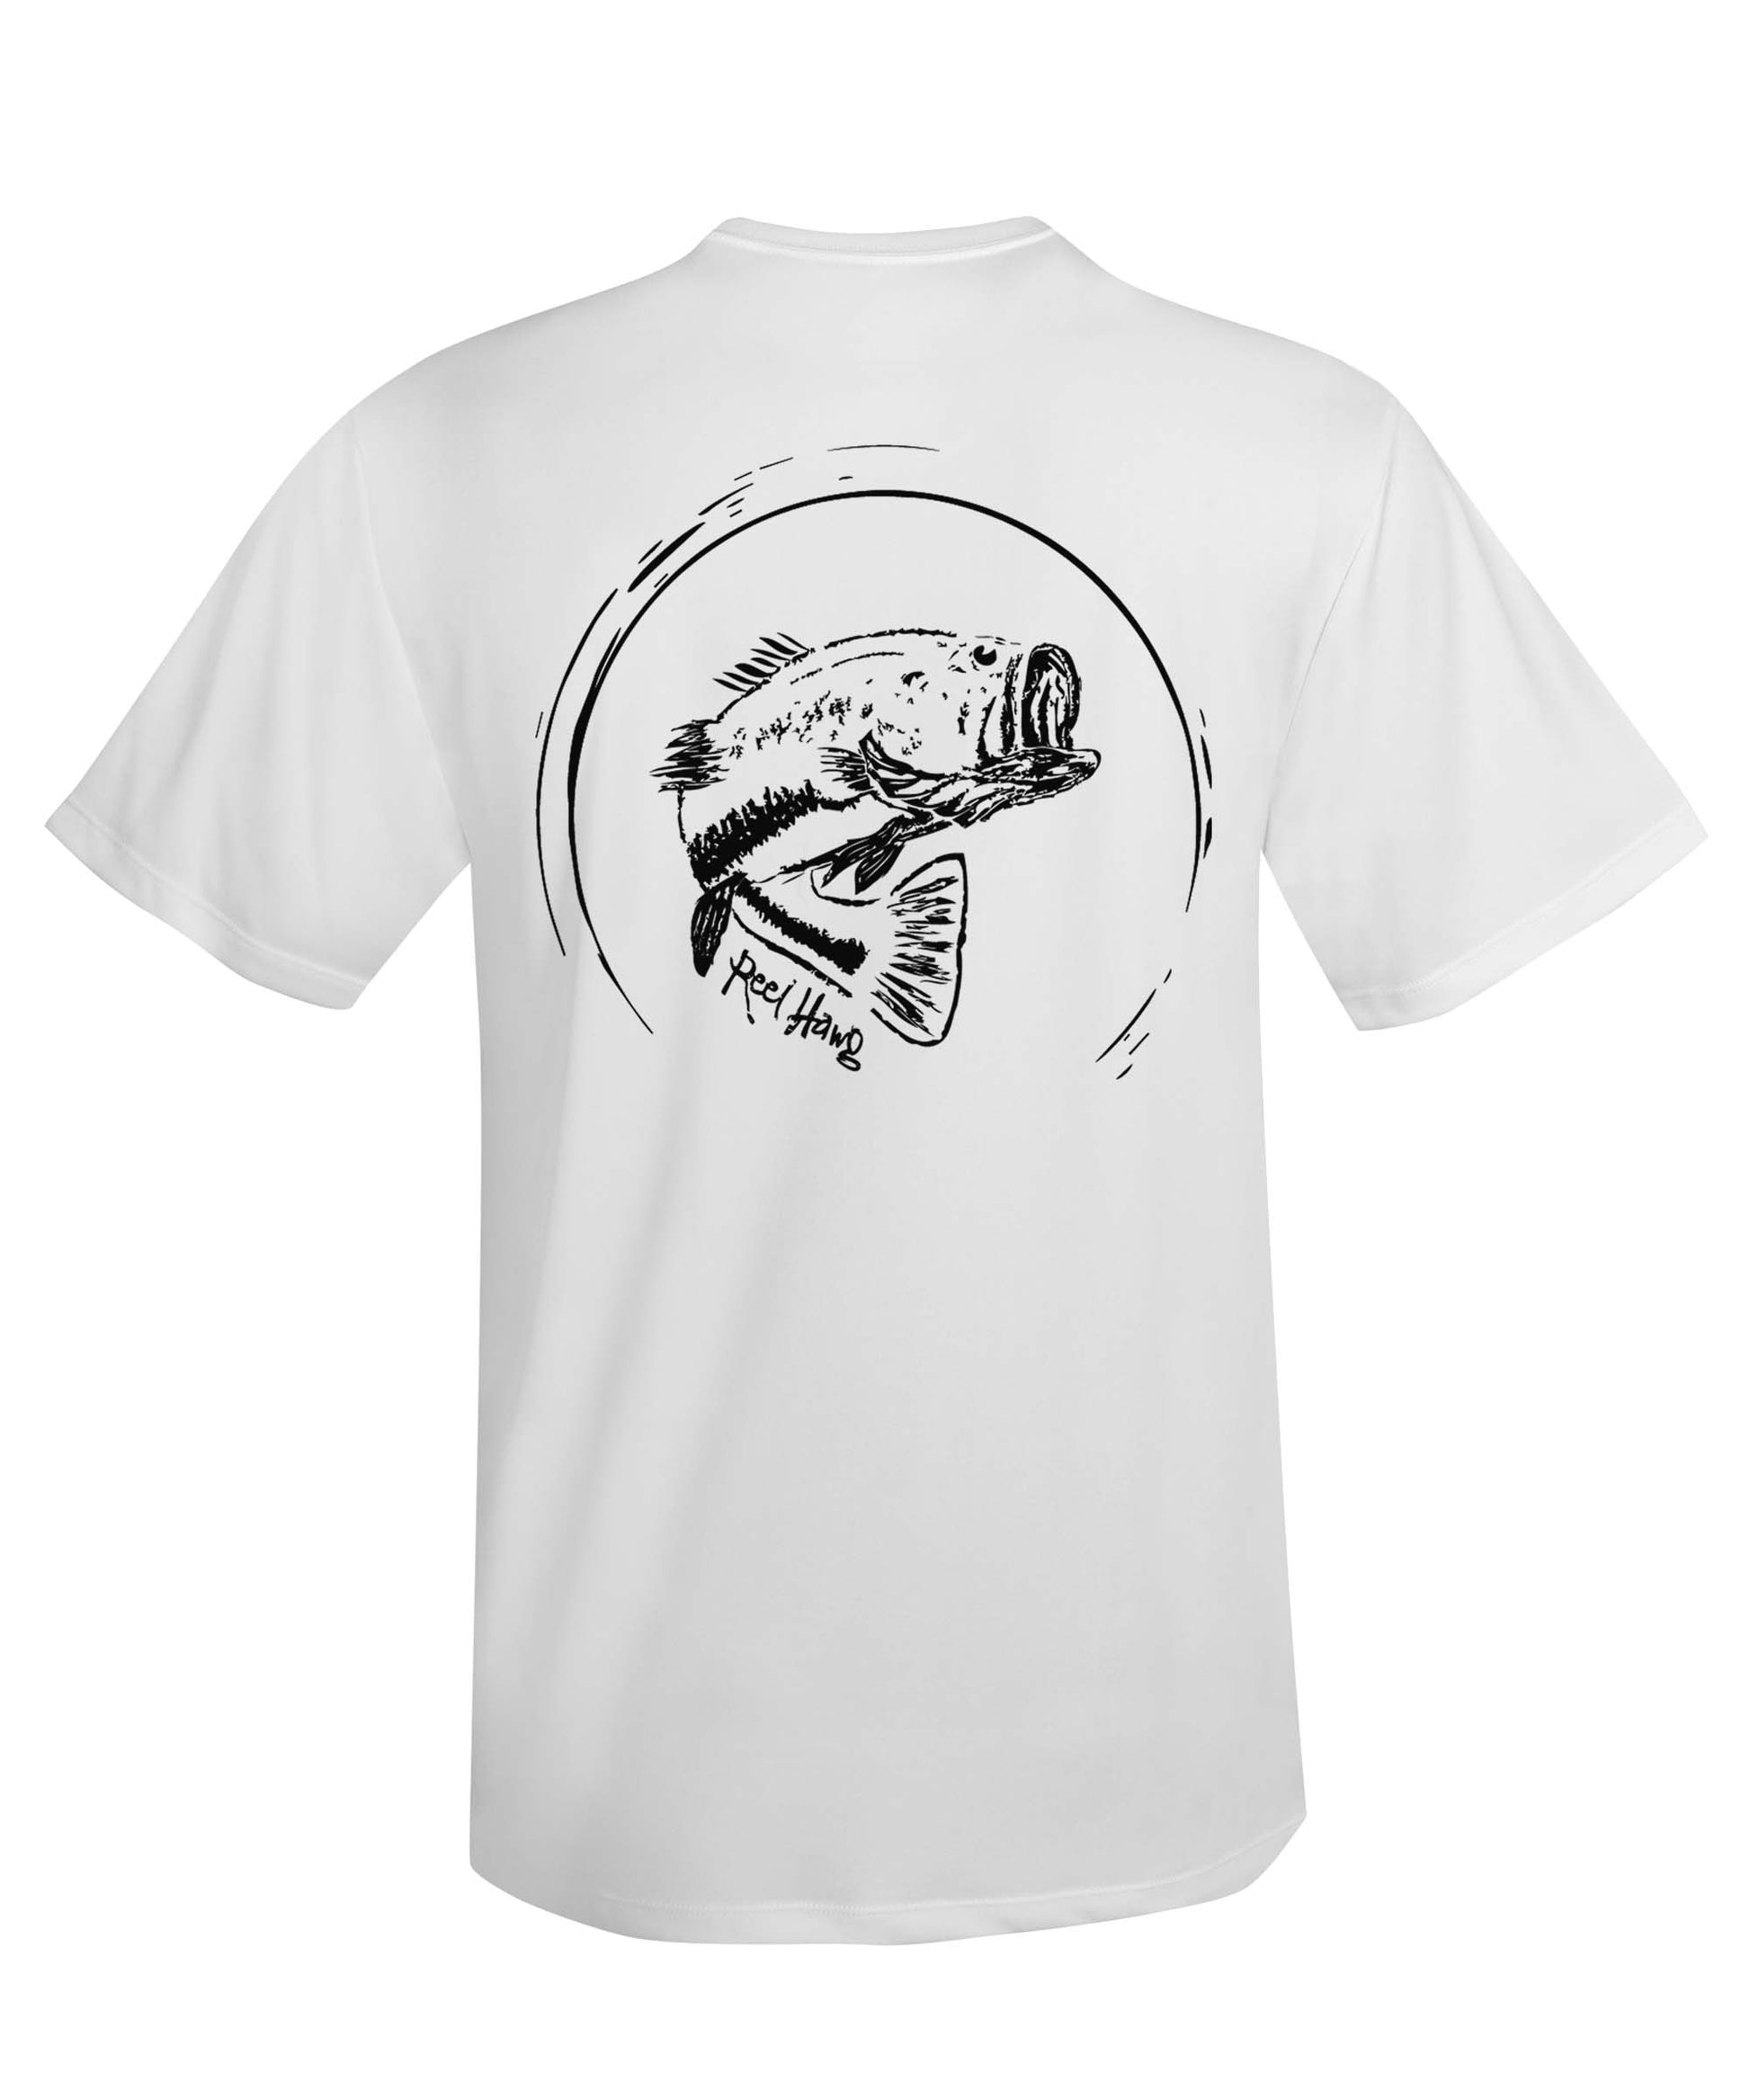 Bass Fishing Performance Dry-Fit 50+ UPF Sun Protection Shirts -Reel Fishy Apparel S / White S/S - unisex